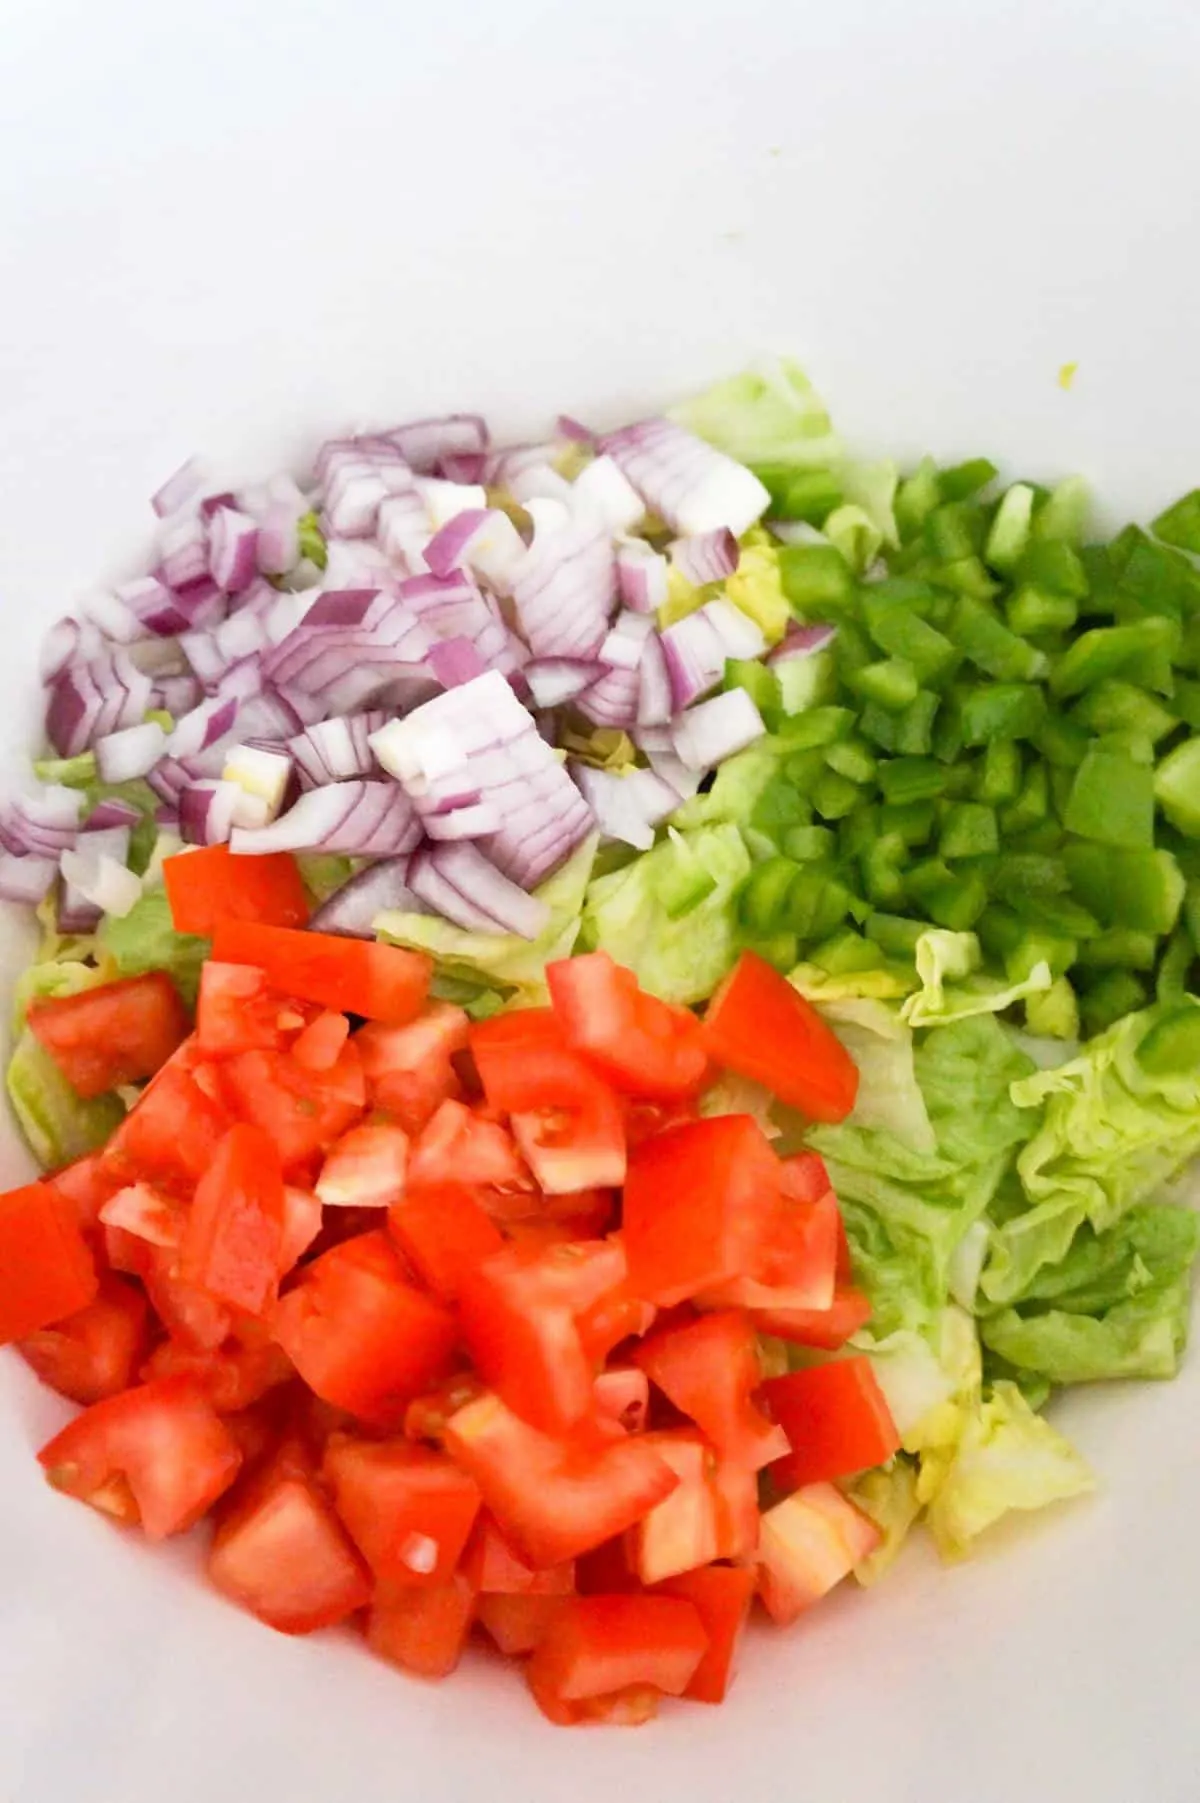 diced red onions, diced green peppers and diced tomatoes on top of lettuc